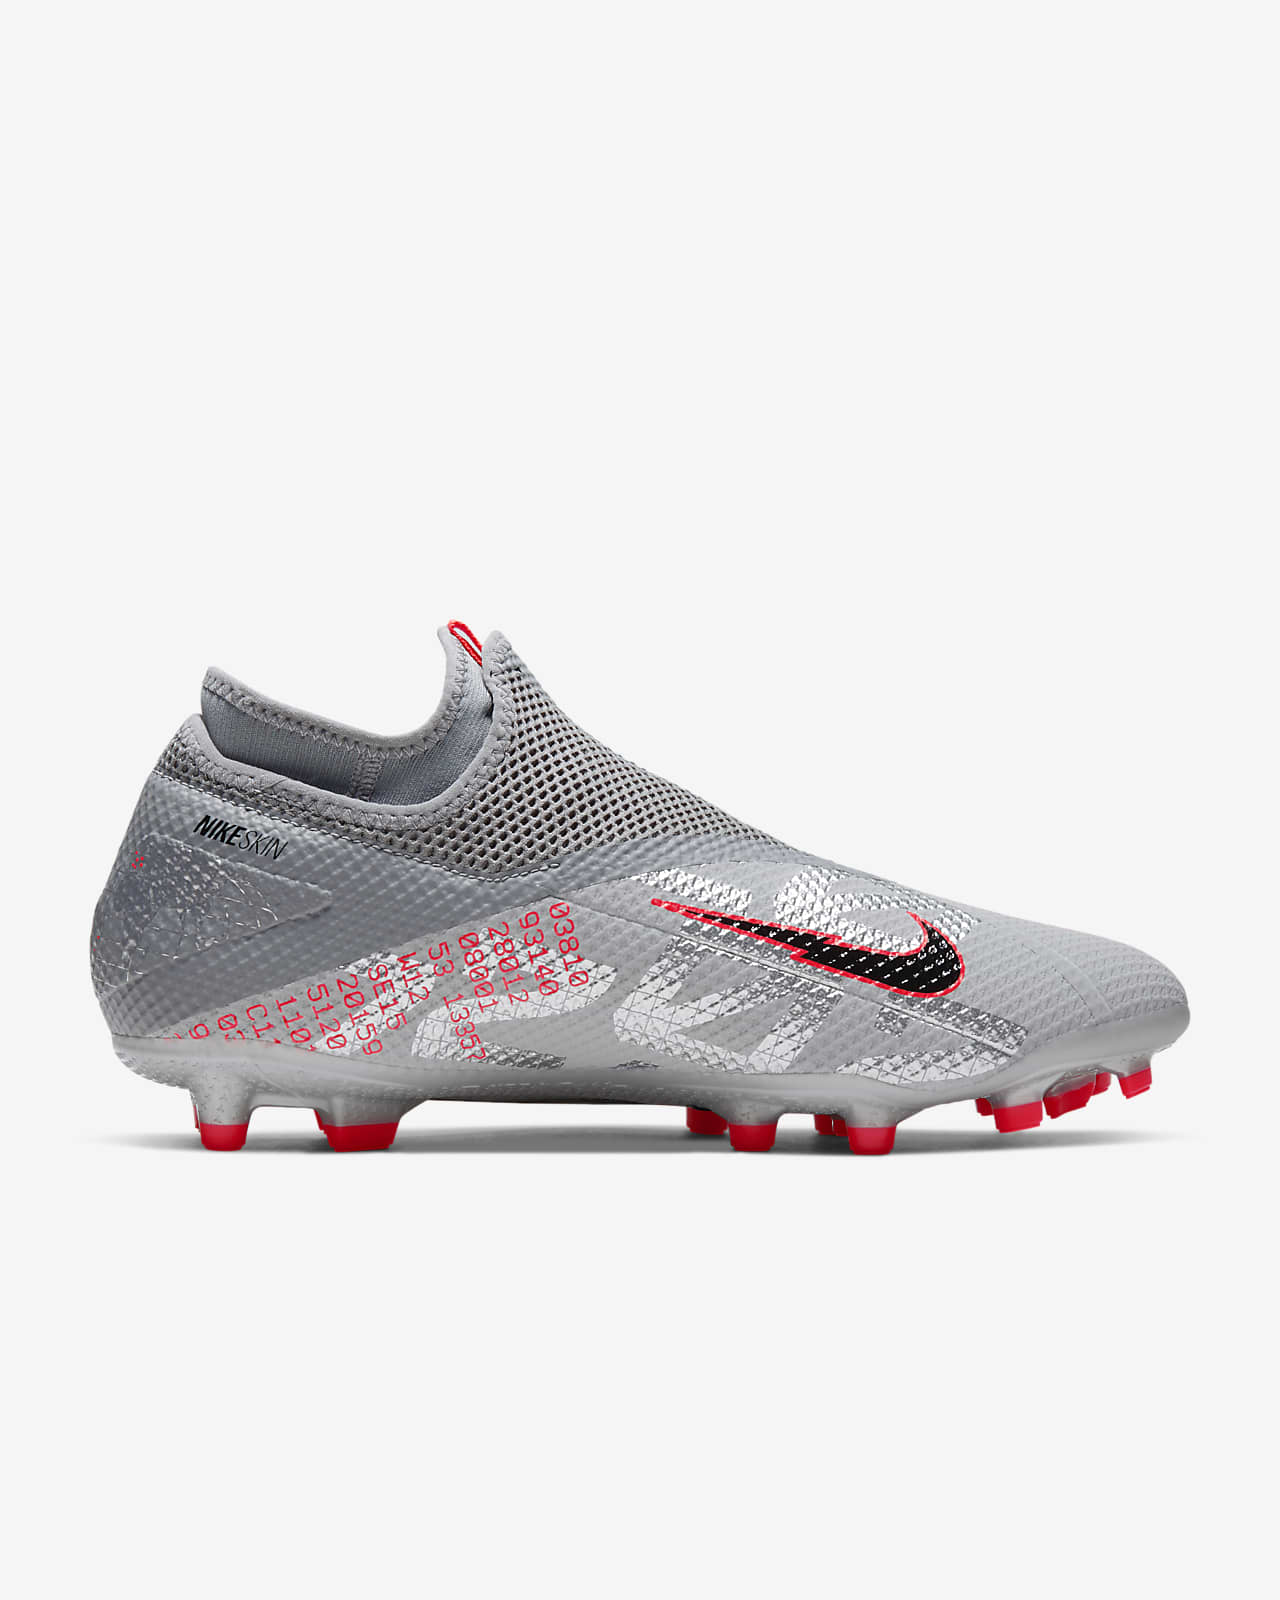 Nike Dynamic Fit Football Boots Online 